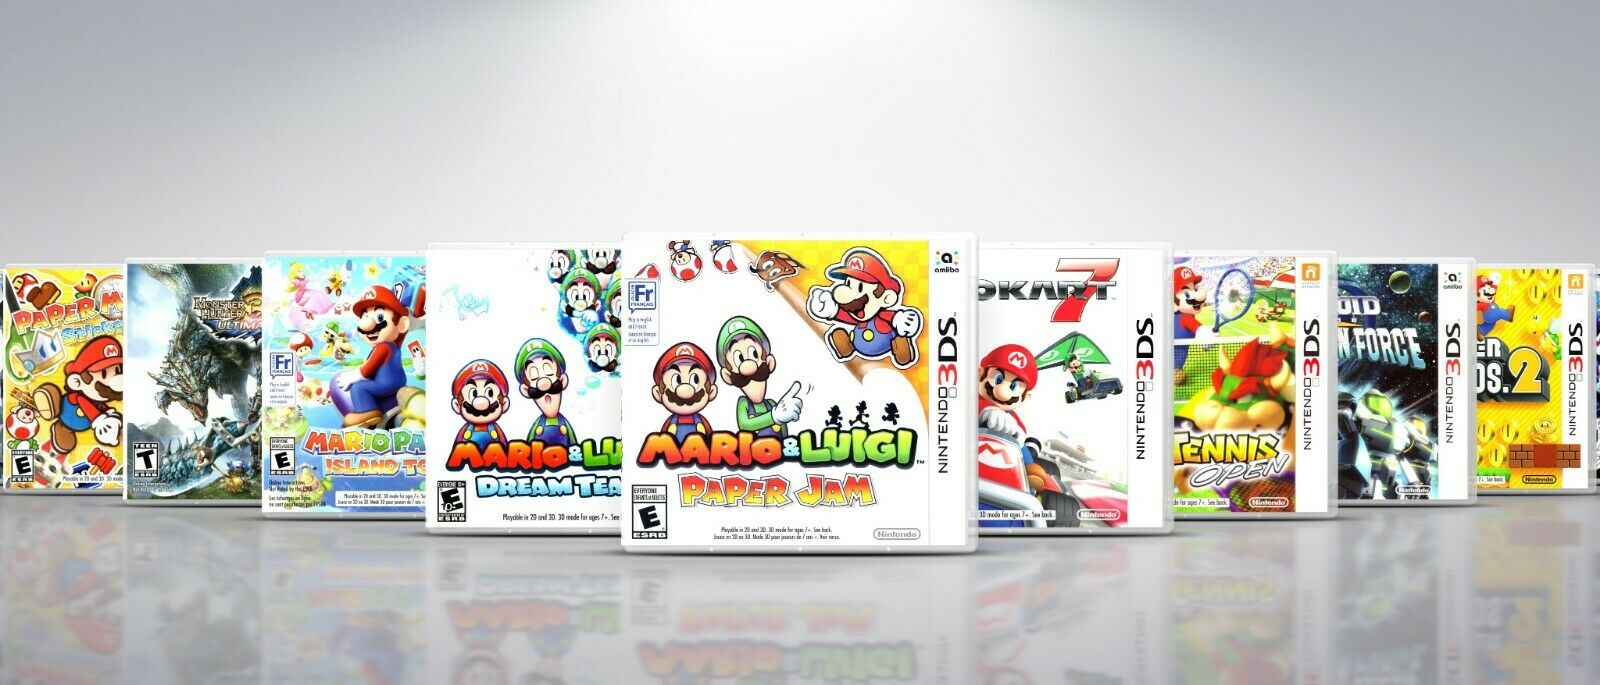 Replacement Nintendo 3ds Titles M-r Covers And Cases. No Games!